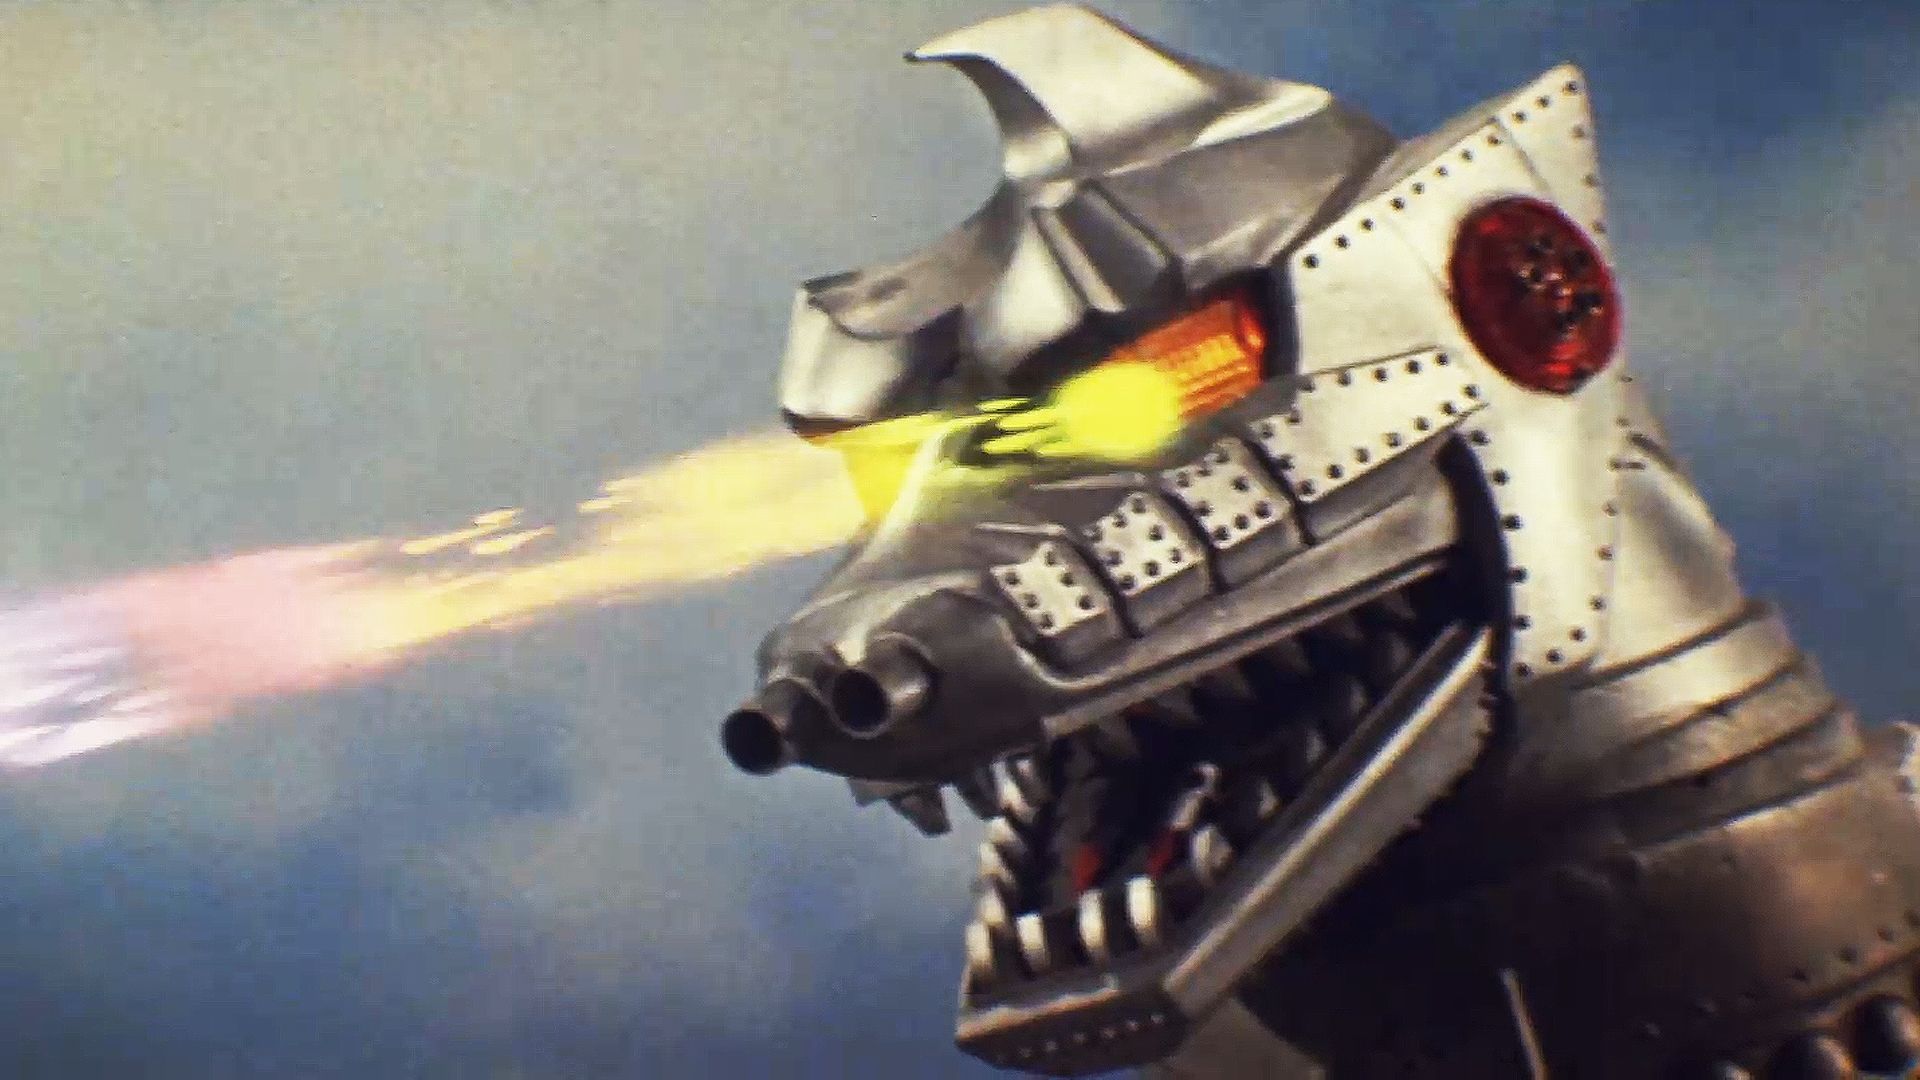 Everything You Need to Know About Mechagodzilla But Were Afraid to Ask